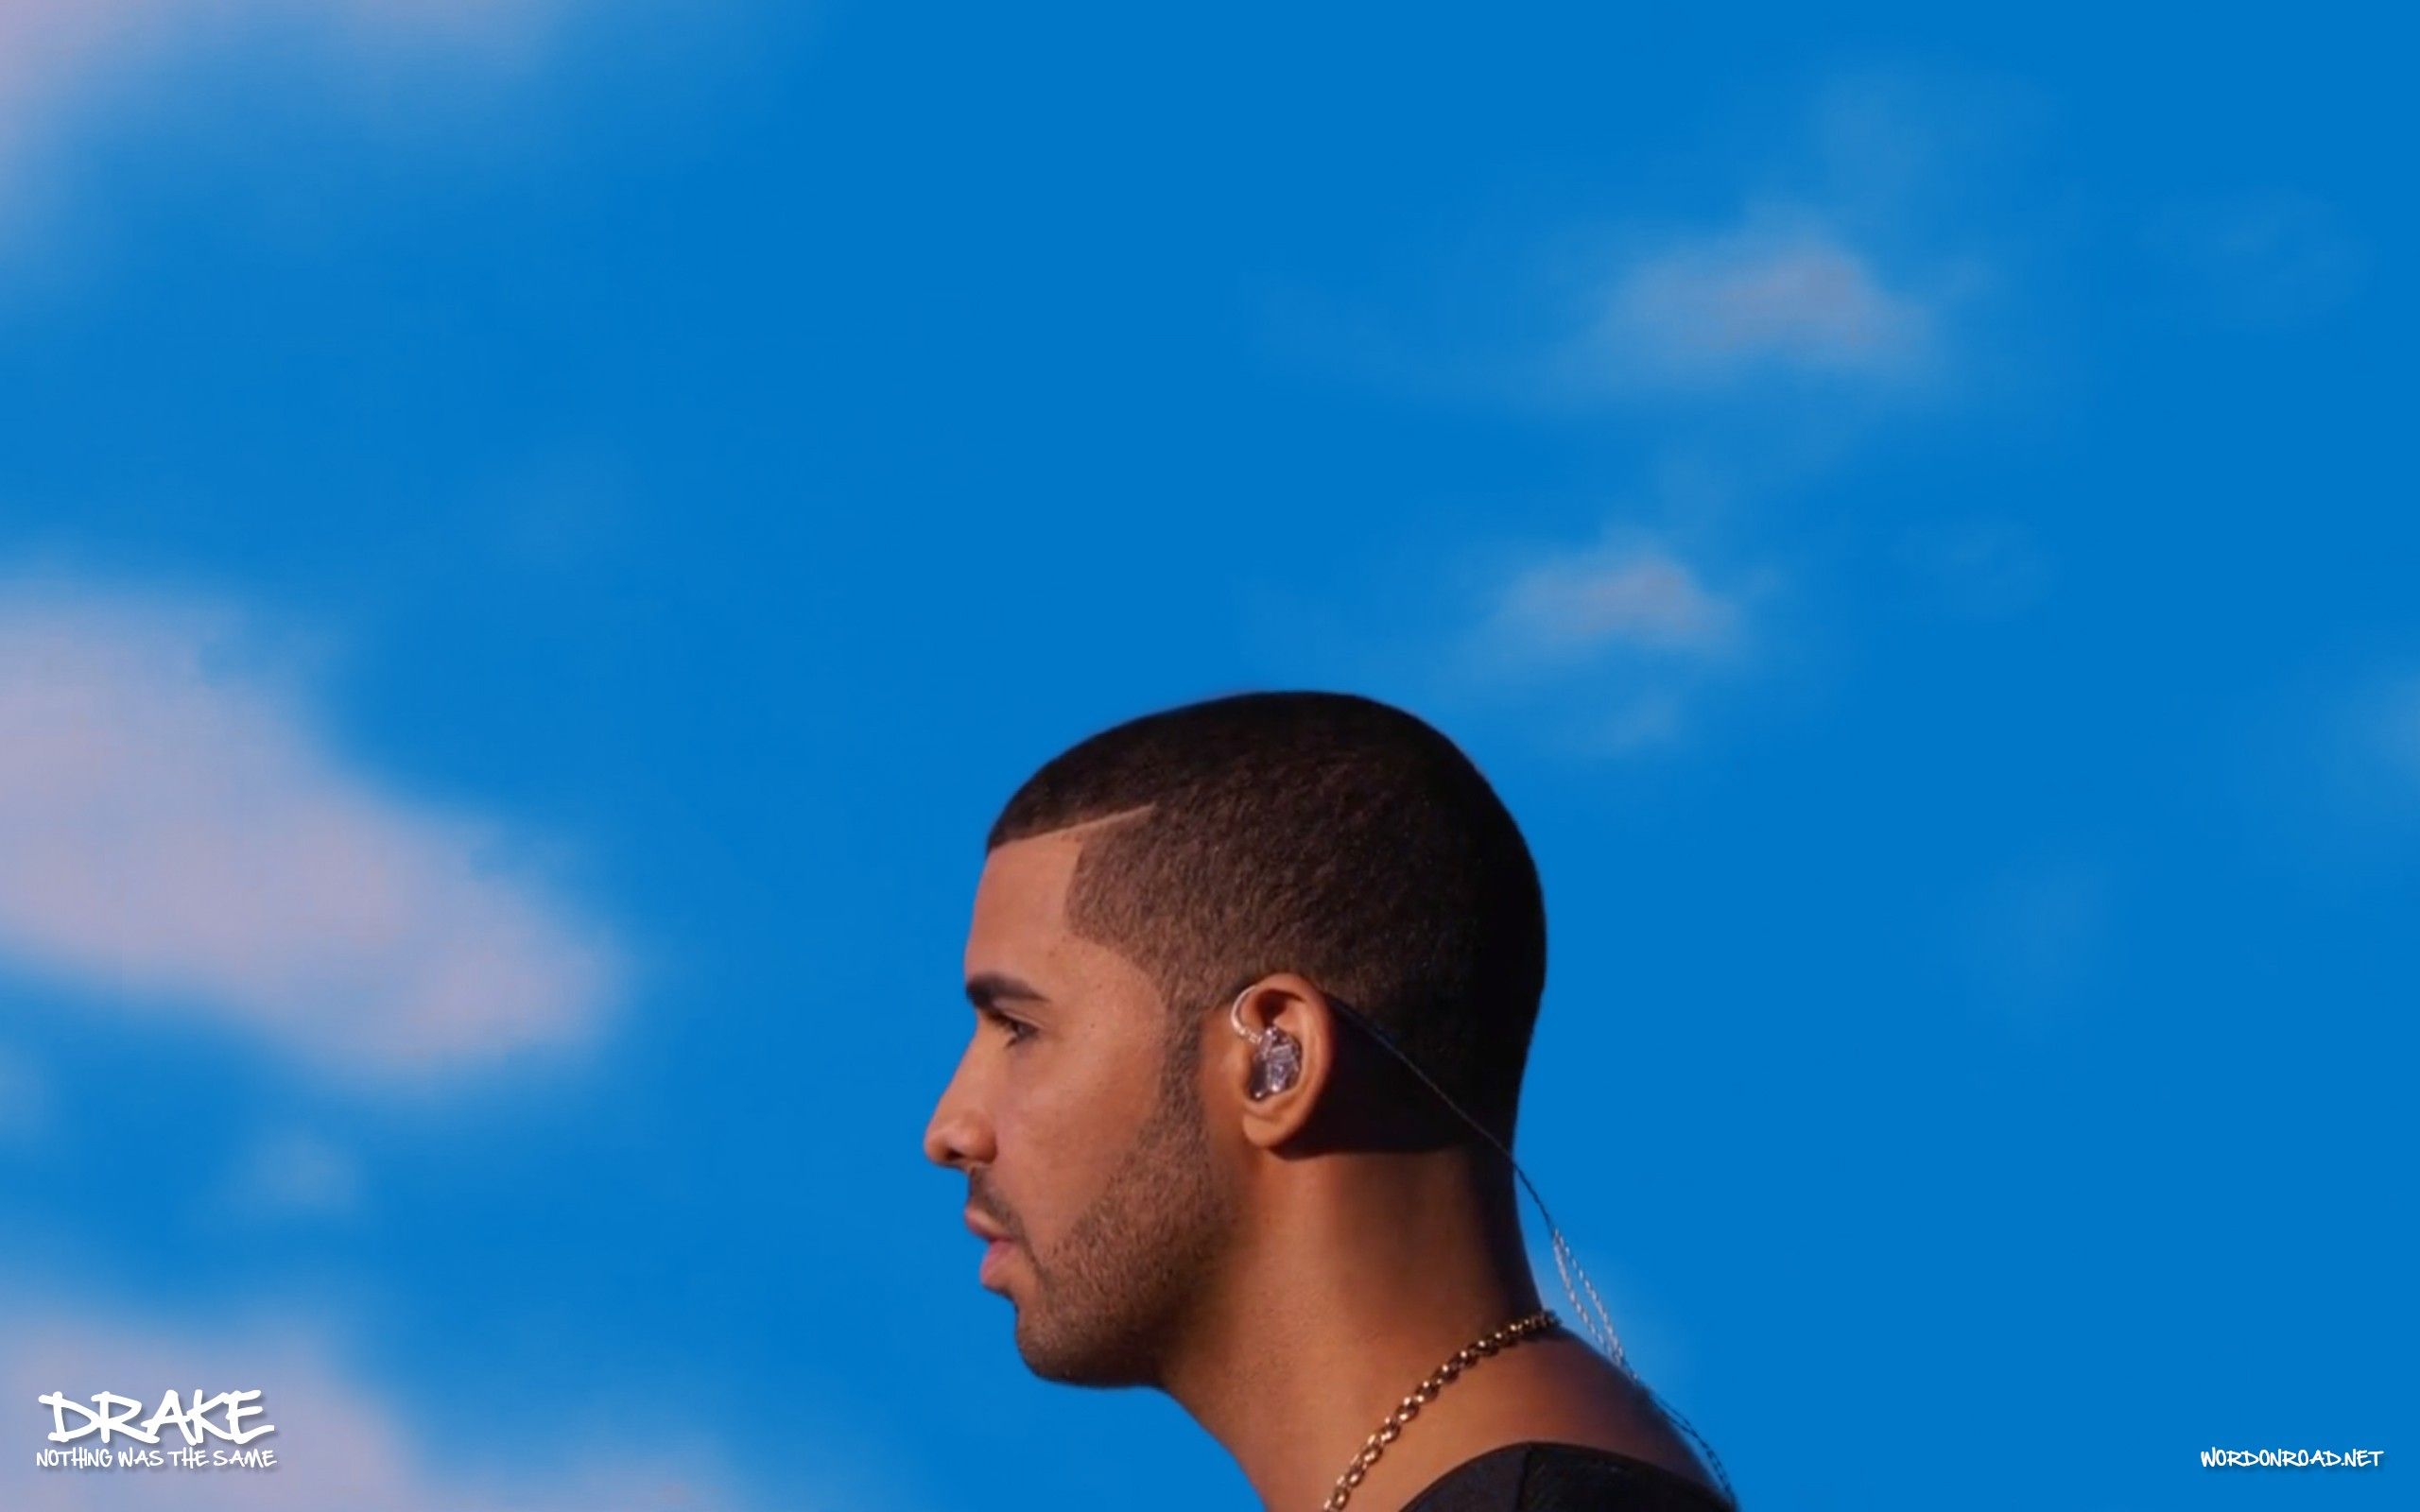 A picture of Drake looking off into the distance with a blue sky in the background. - Drake